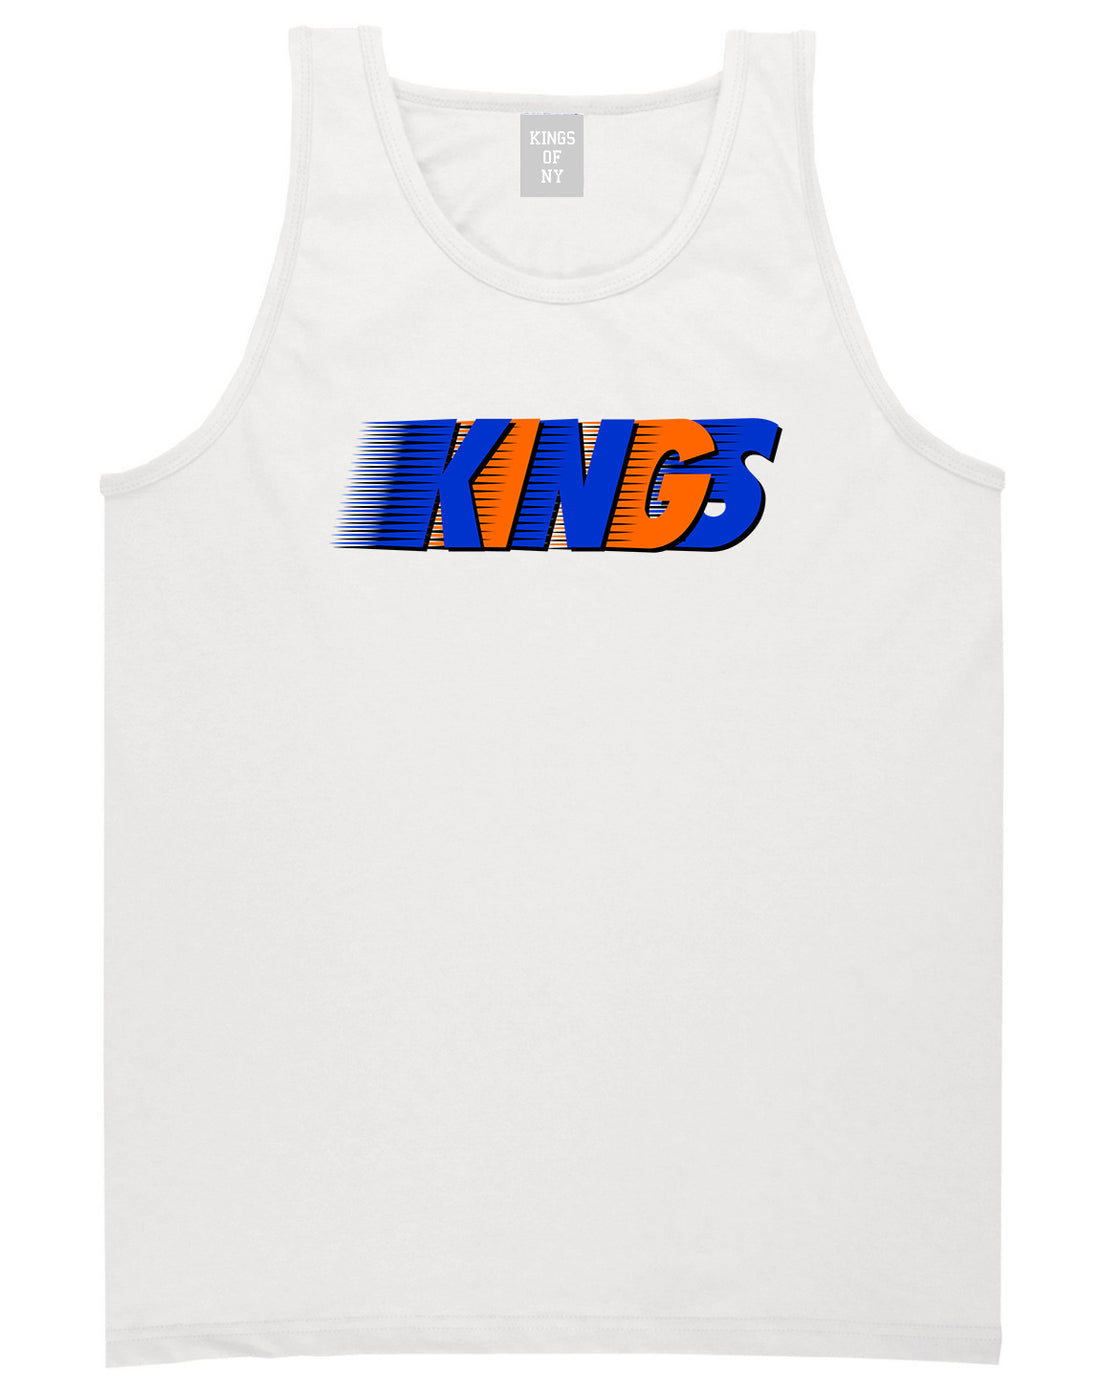 KINGS NY Colors T-Shirt in White